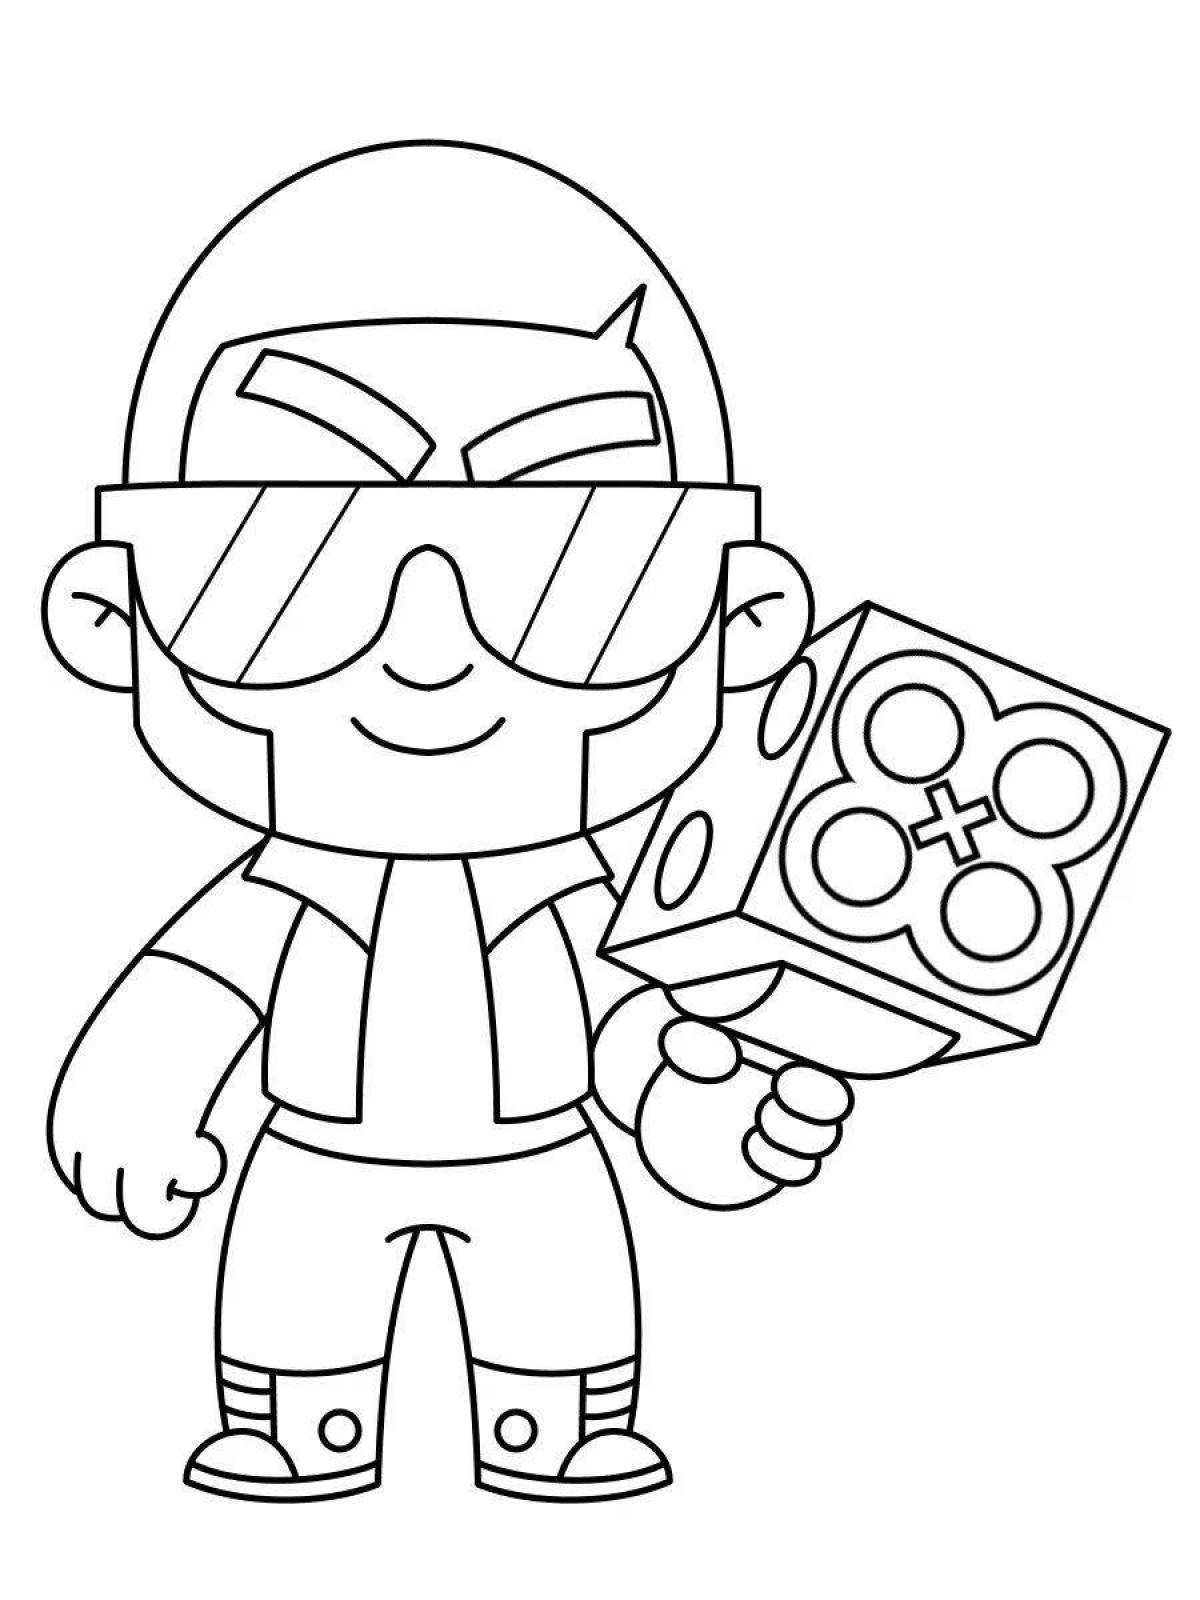 Coloring page adorable leon for kids